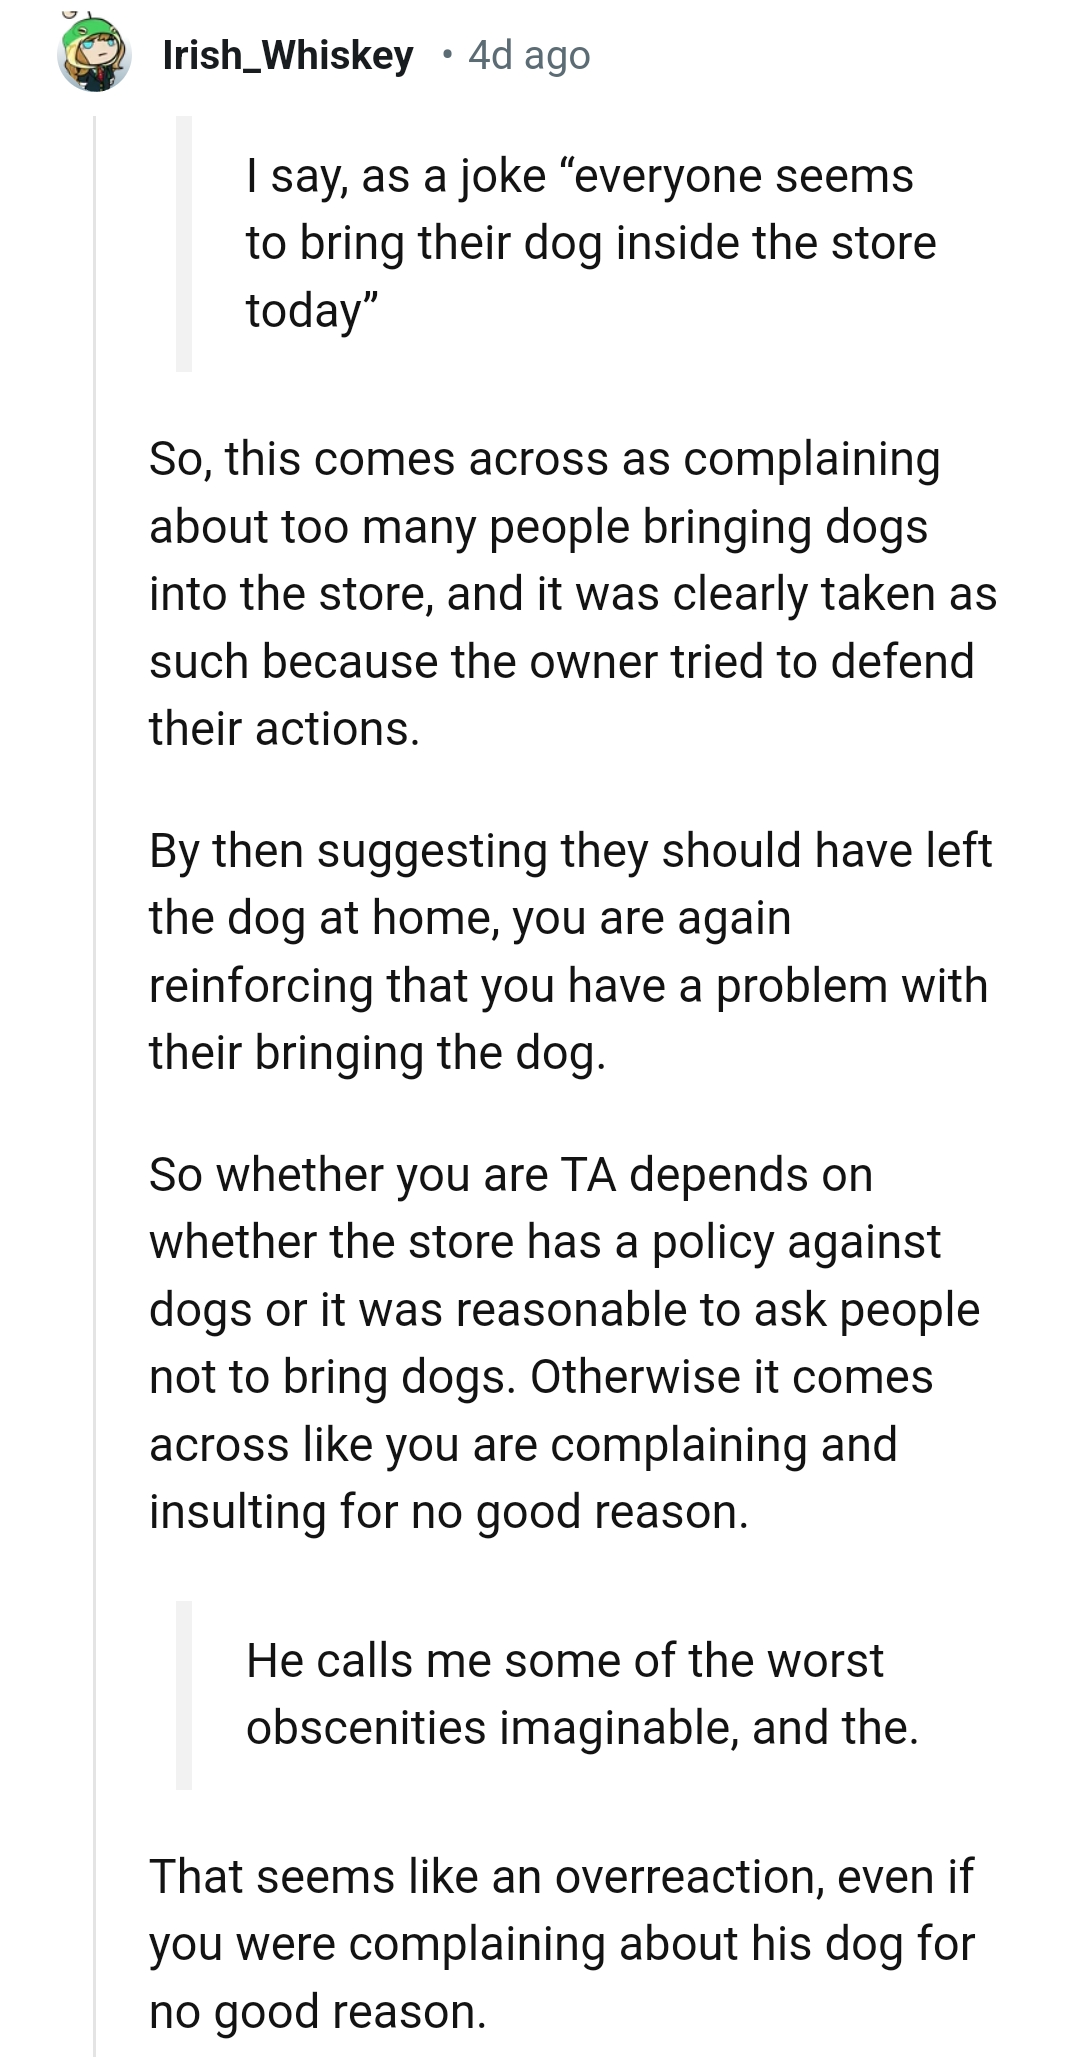 The OP is suggesting that they should have left the dog at home